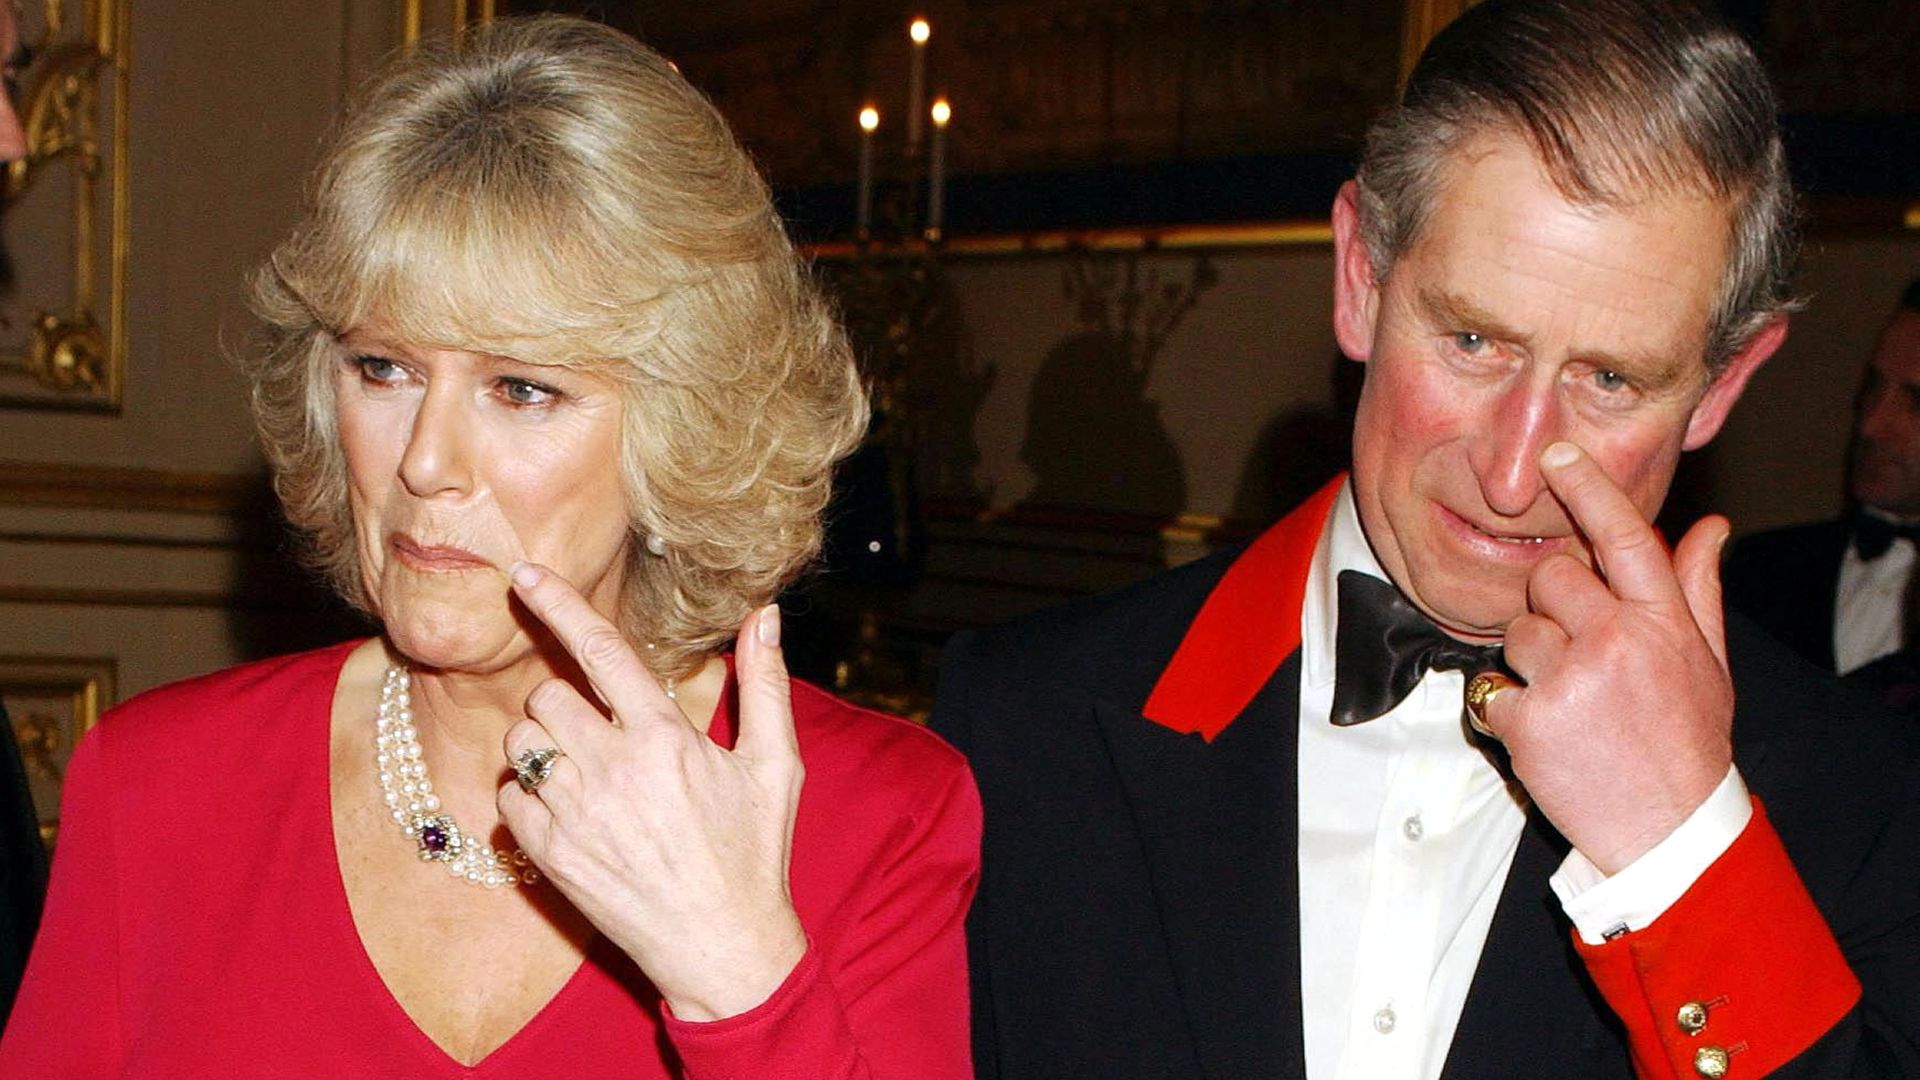 Queen Camilla wearing a red dress and her new engagement ring